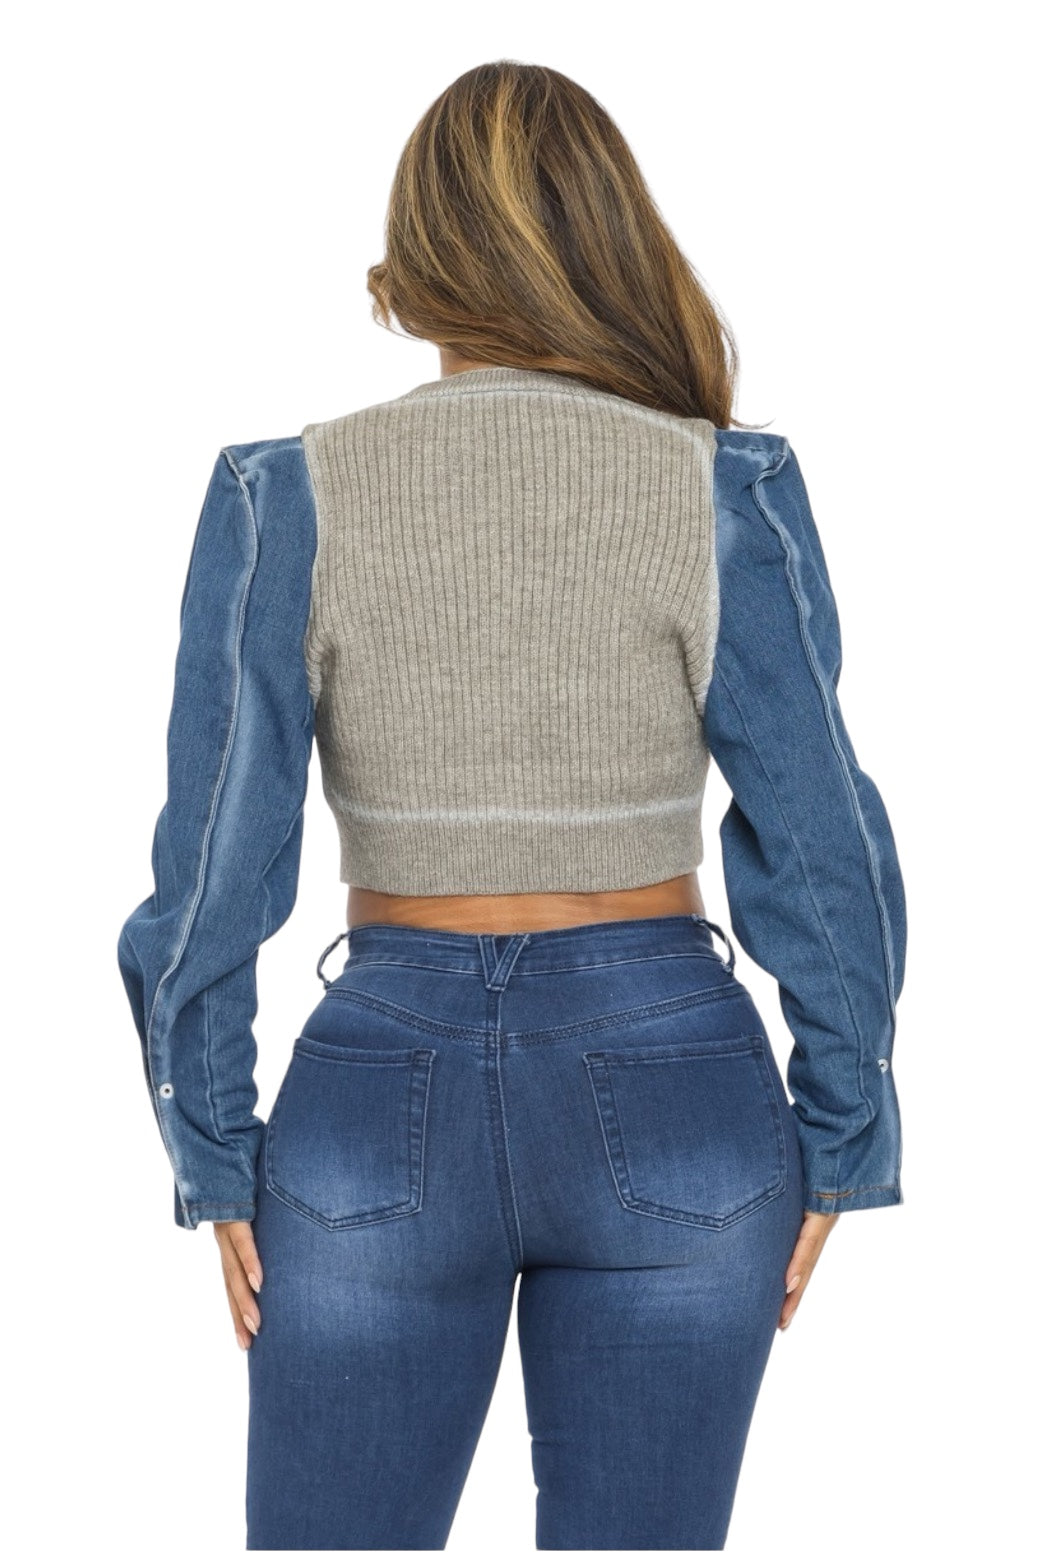 Denim Sleeve Knit Cropped Top